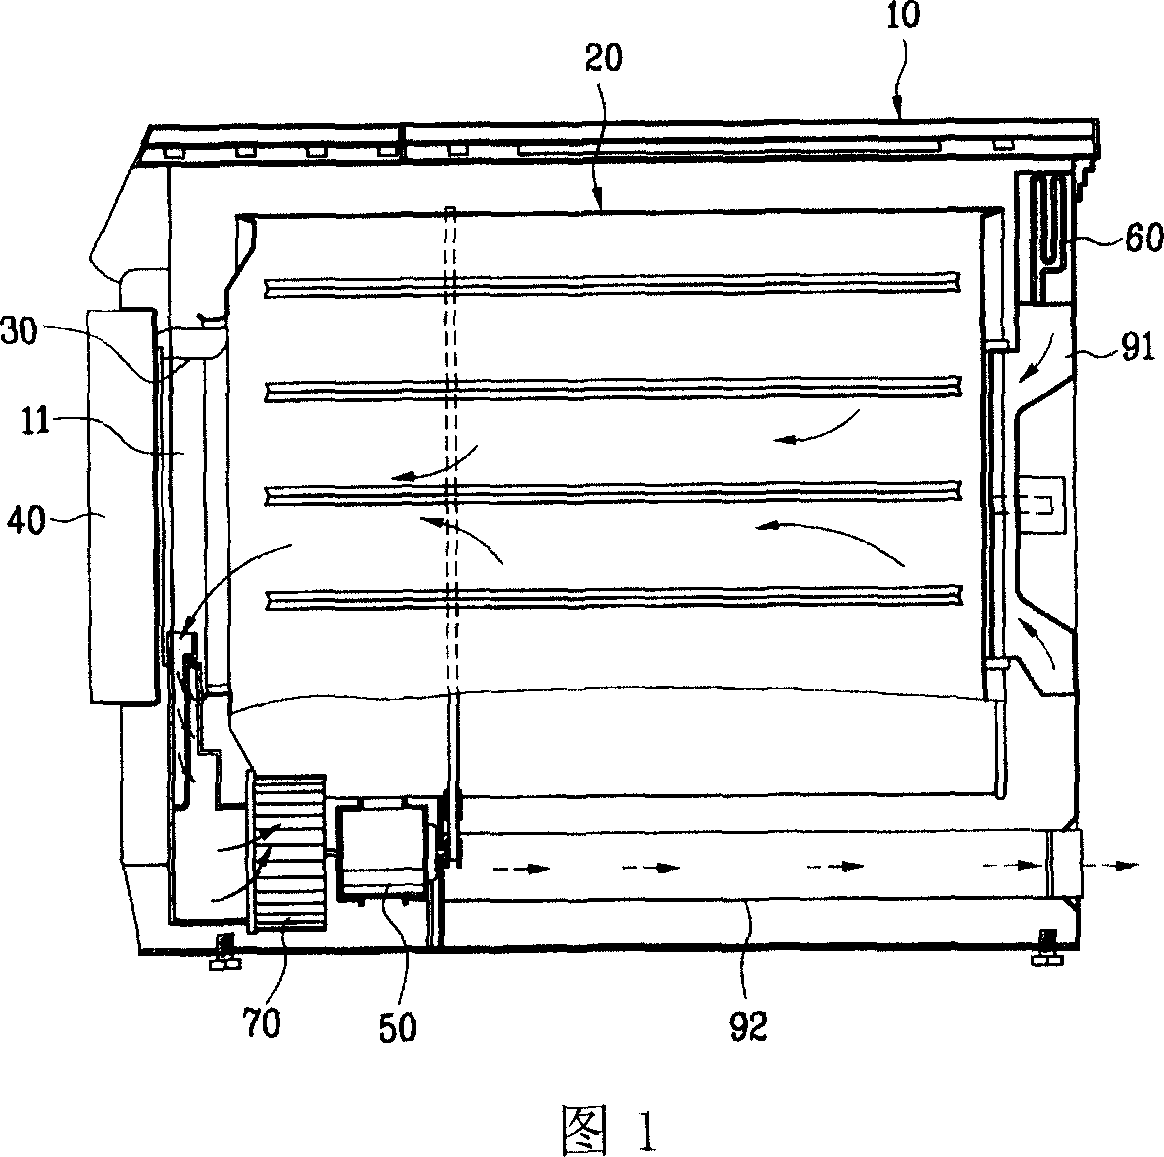 Composite drying machine with rotating hanger